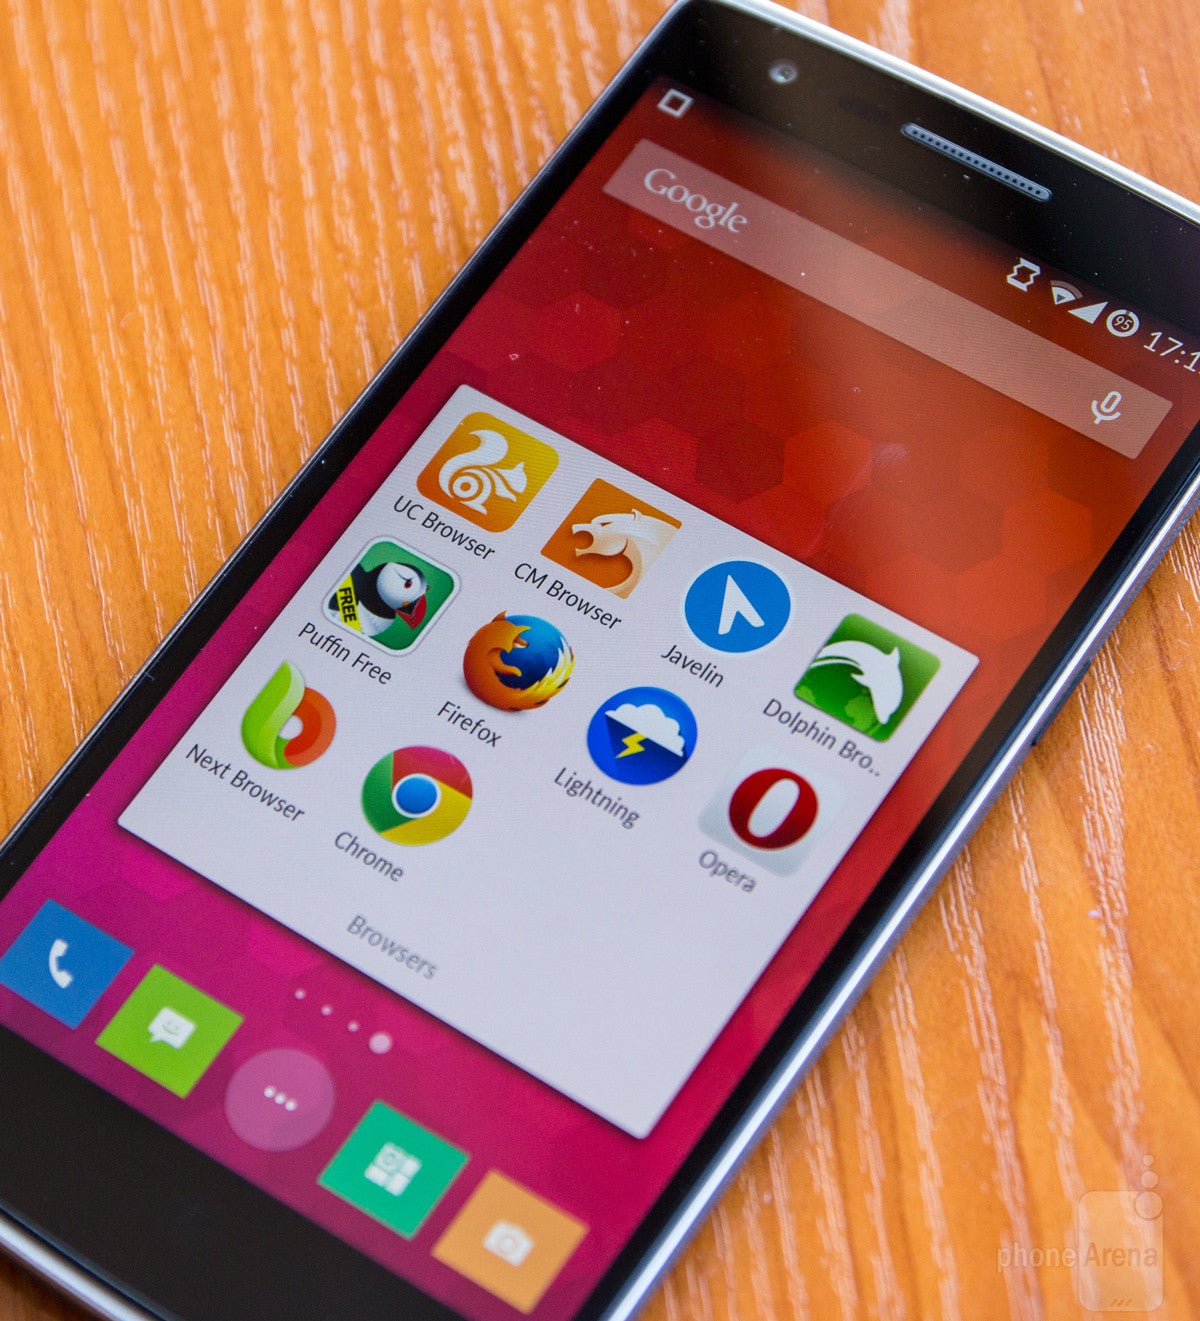 We used the OnePlus One to test all of the browsers - The best Android browsers, 2014 edition: speed, design, and features